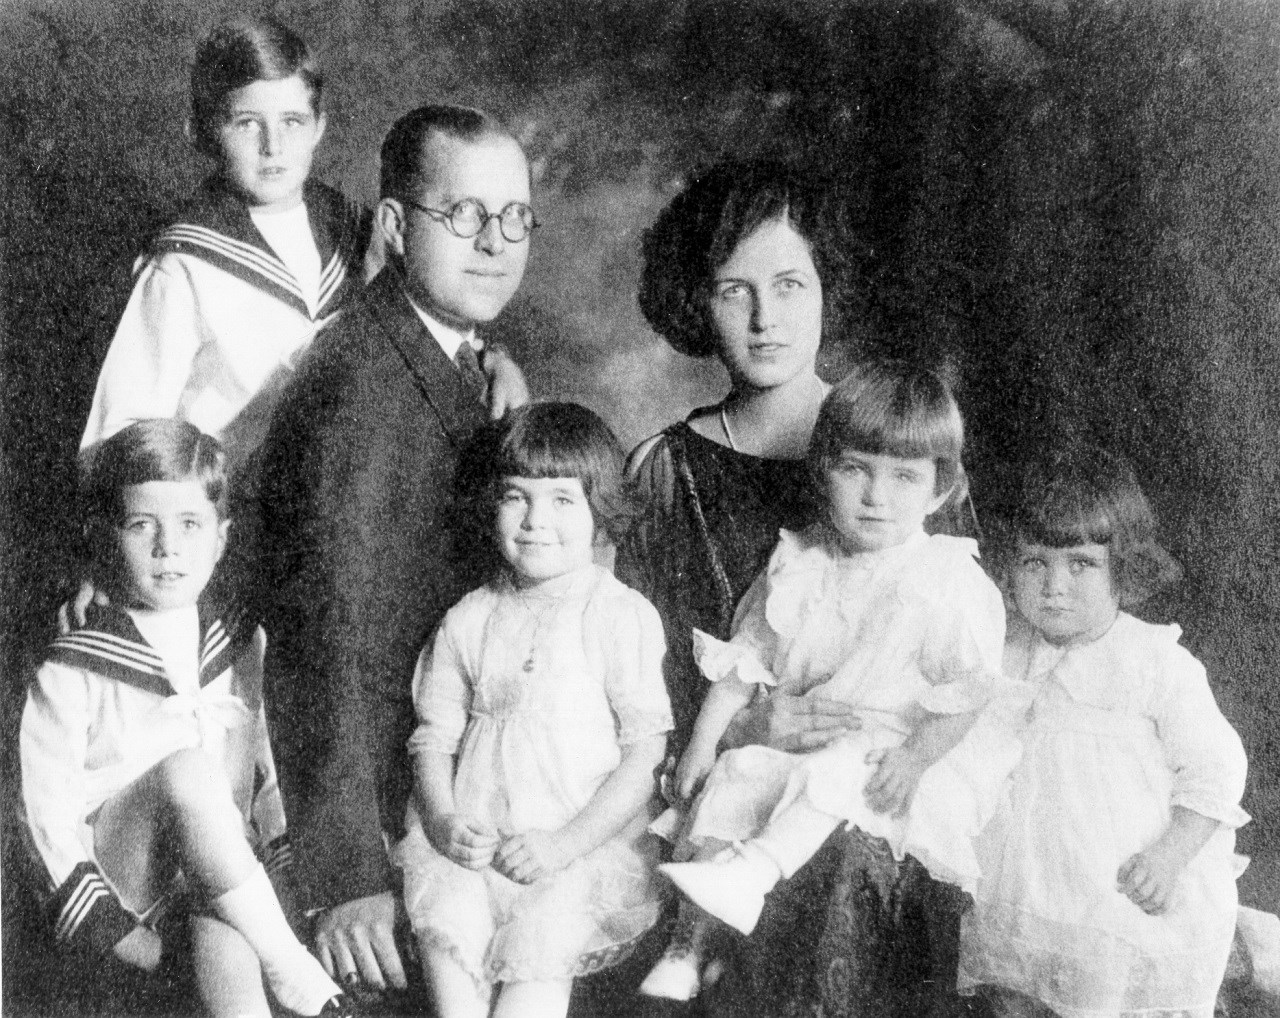 A photo of the Kennedy family Ca. 1922